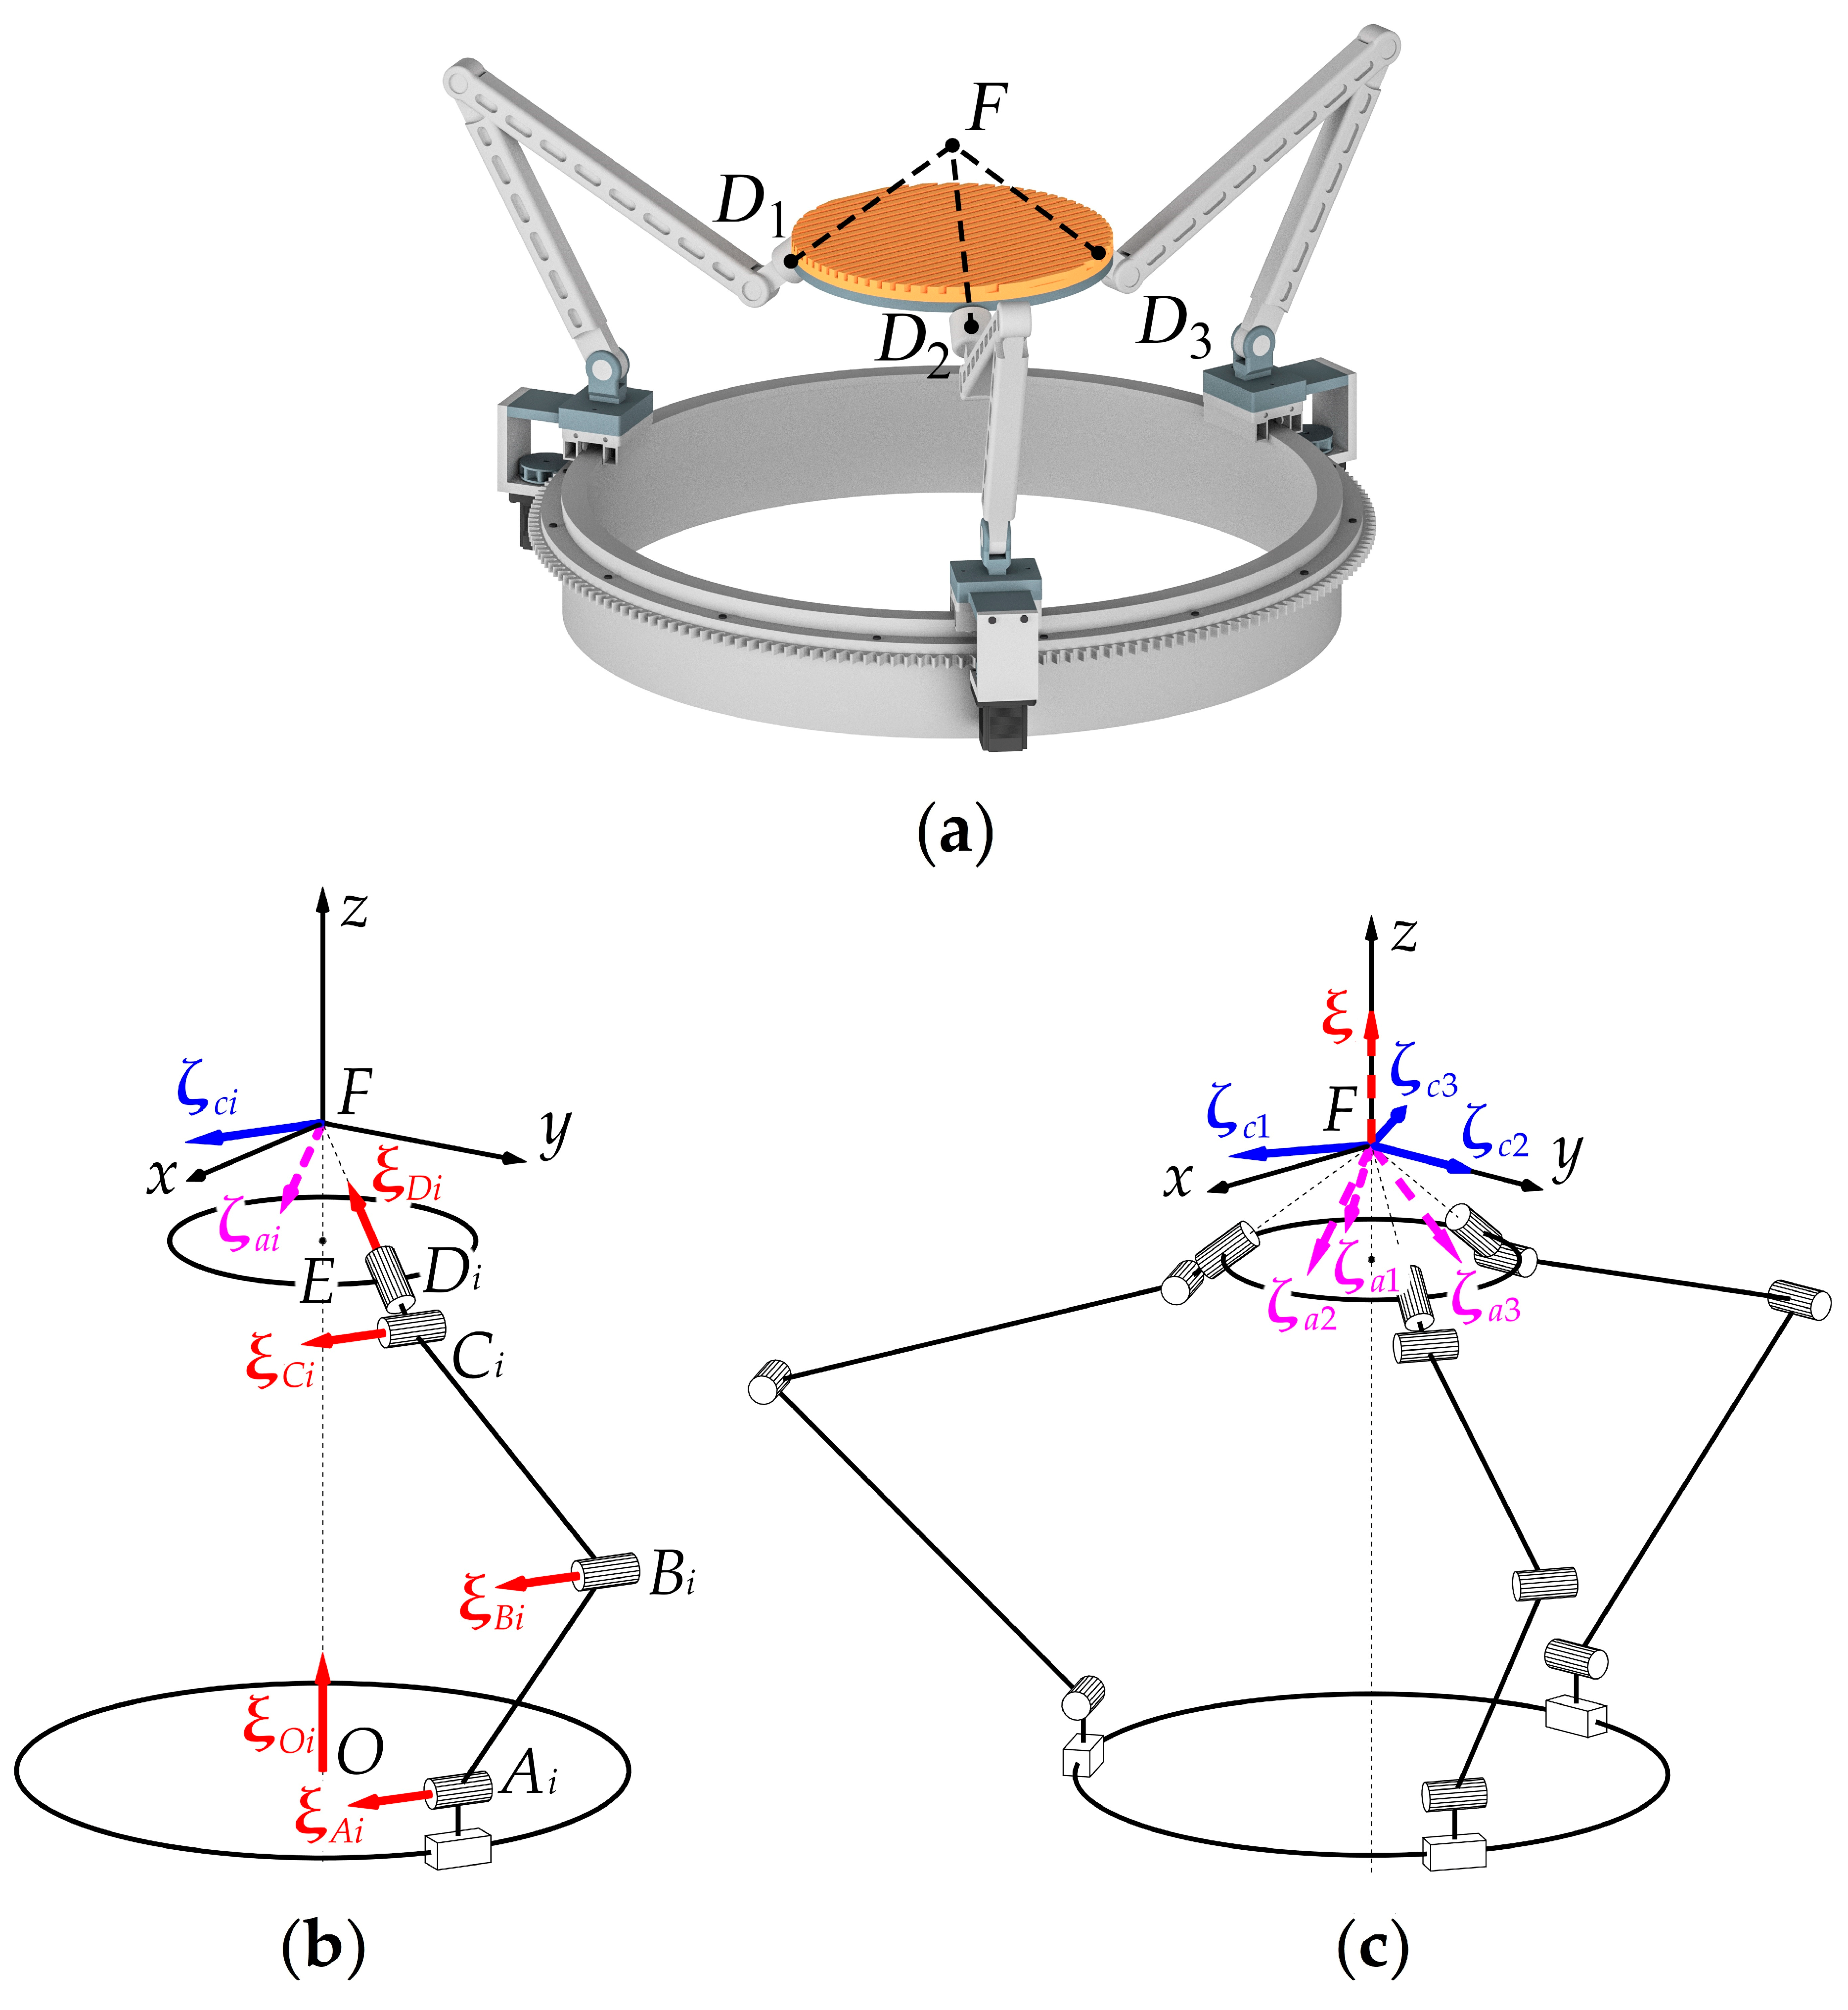 Design and Analysis of a Spherical Joint Mechanism for Robotic Manipulators